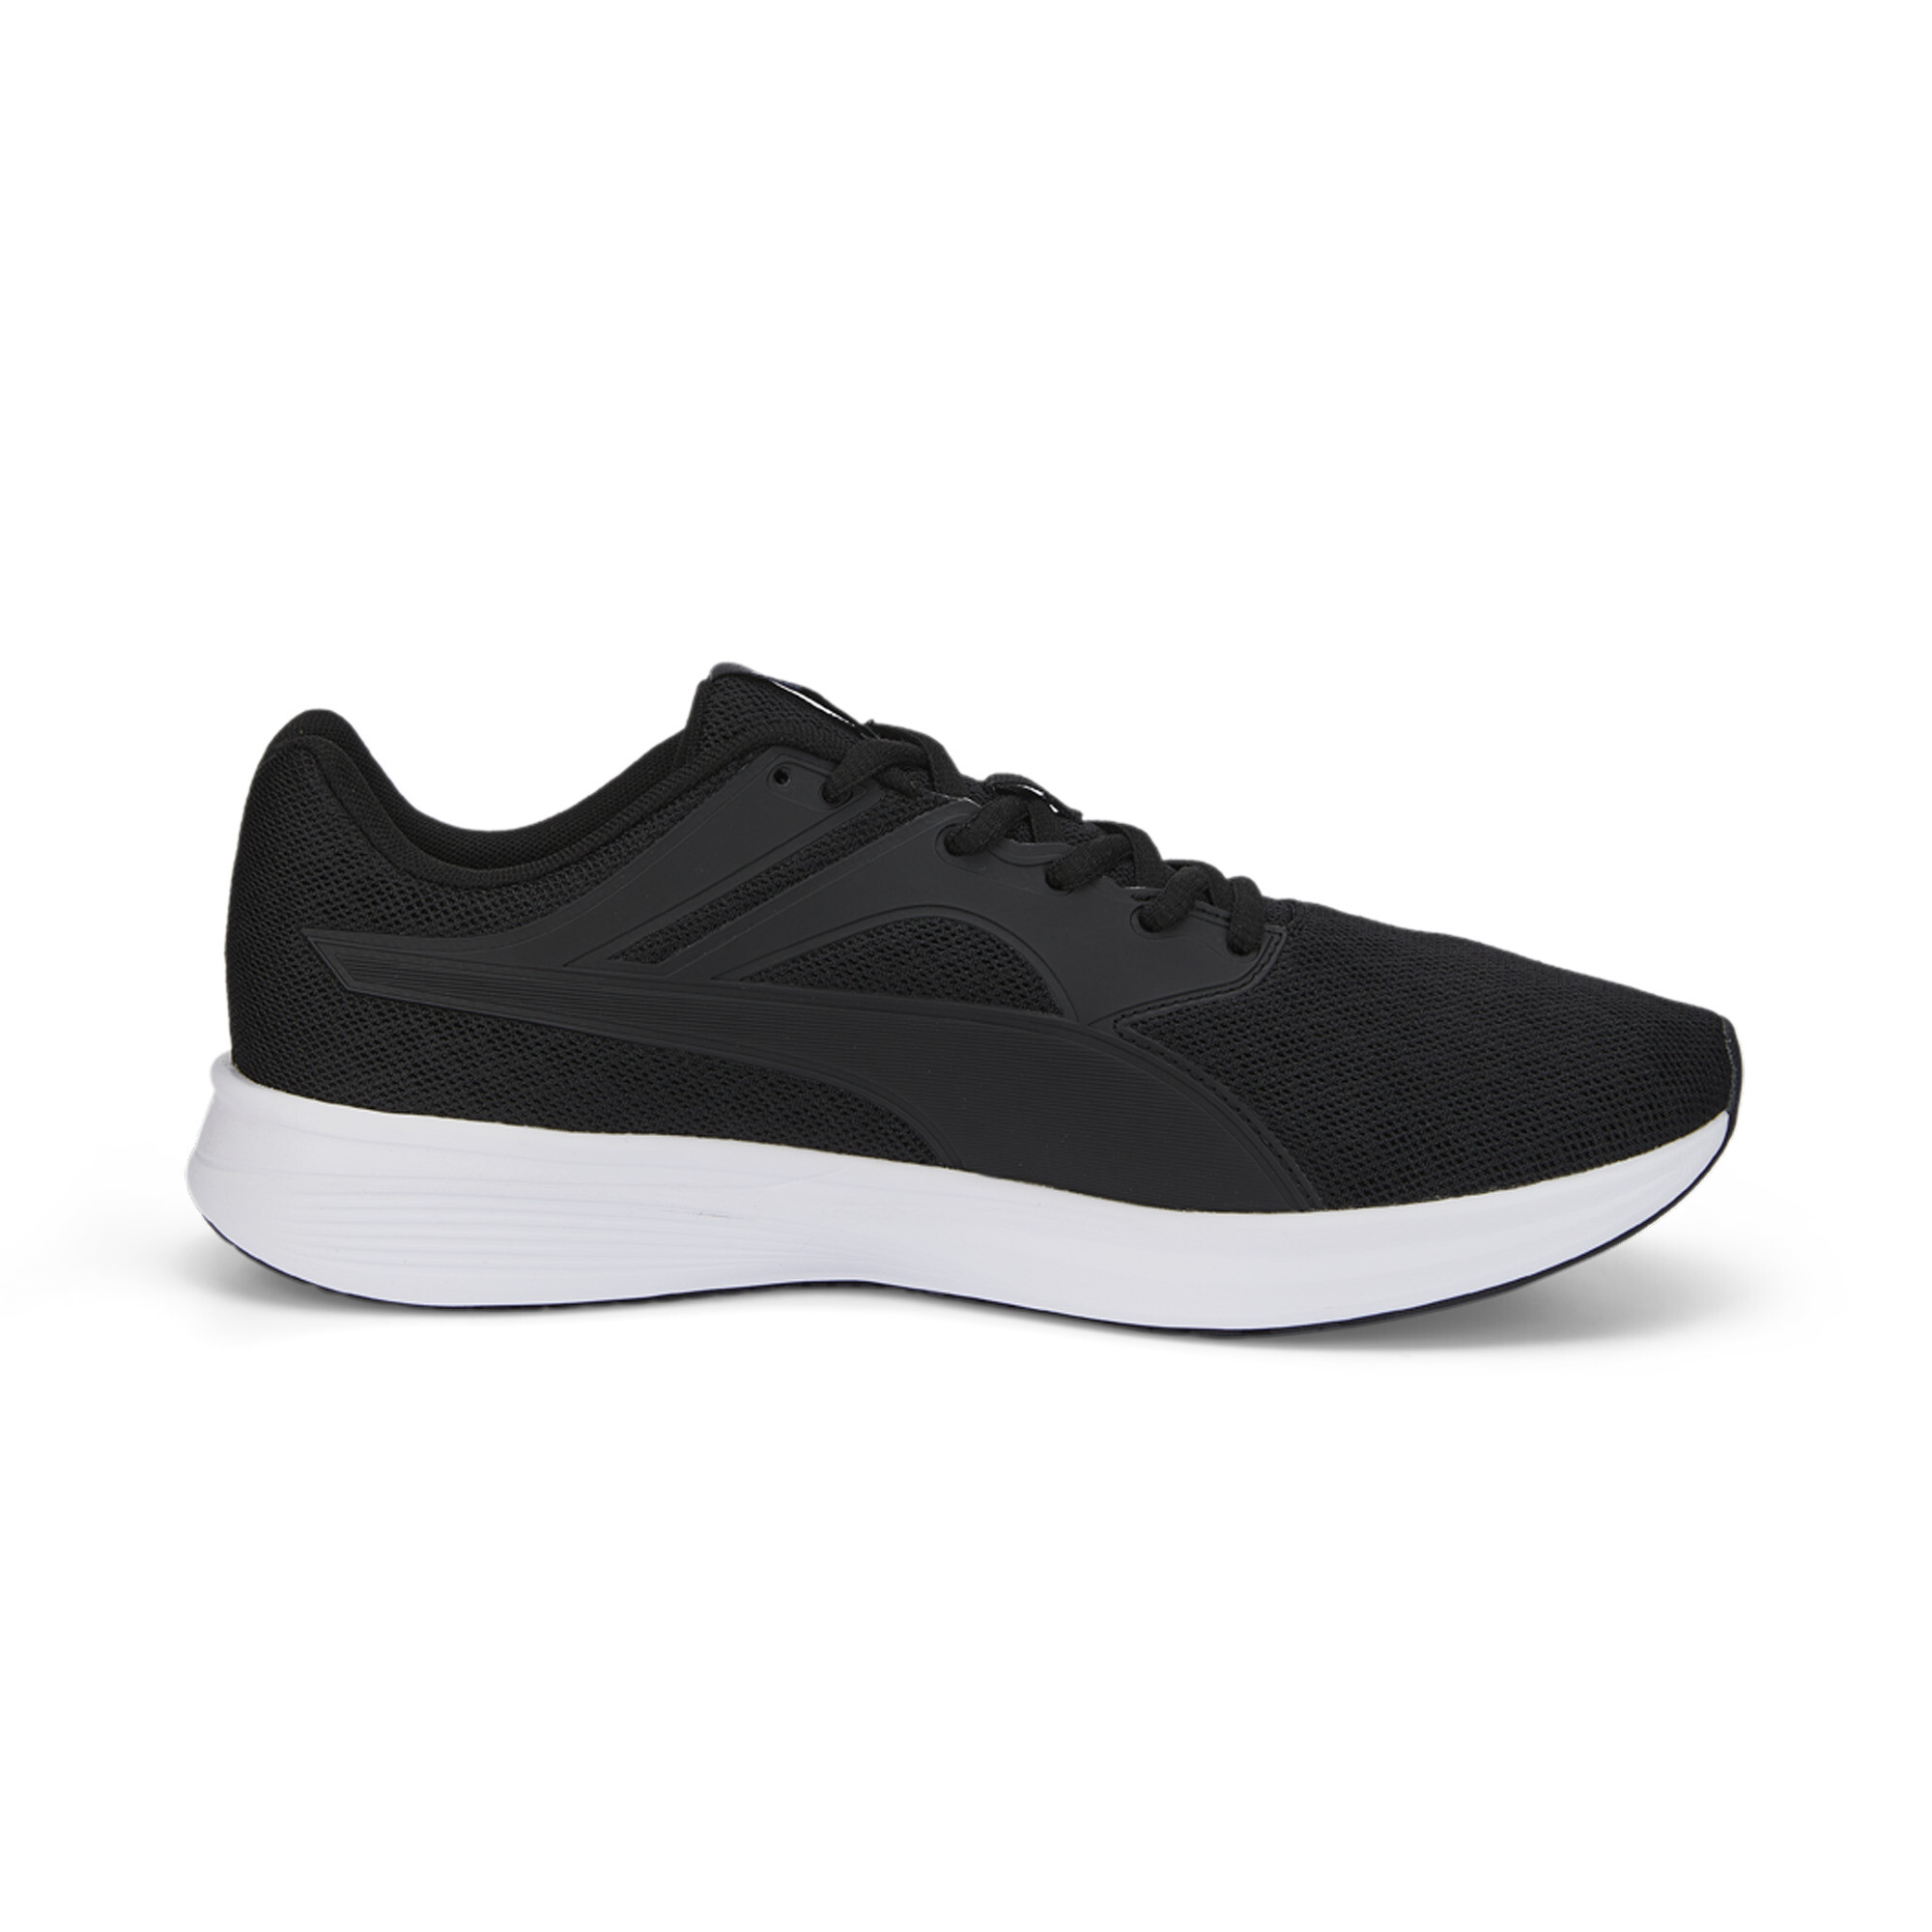 Puma Transport Running Shoes, Black, Size 36, Shoes